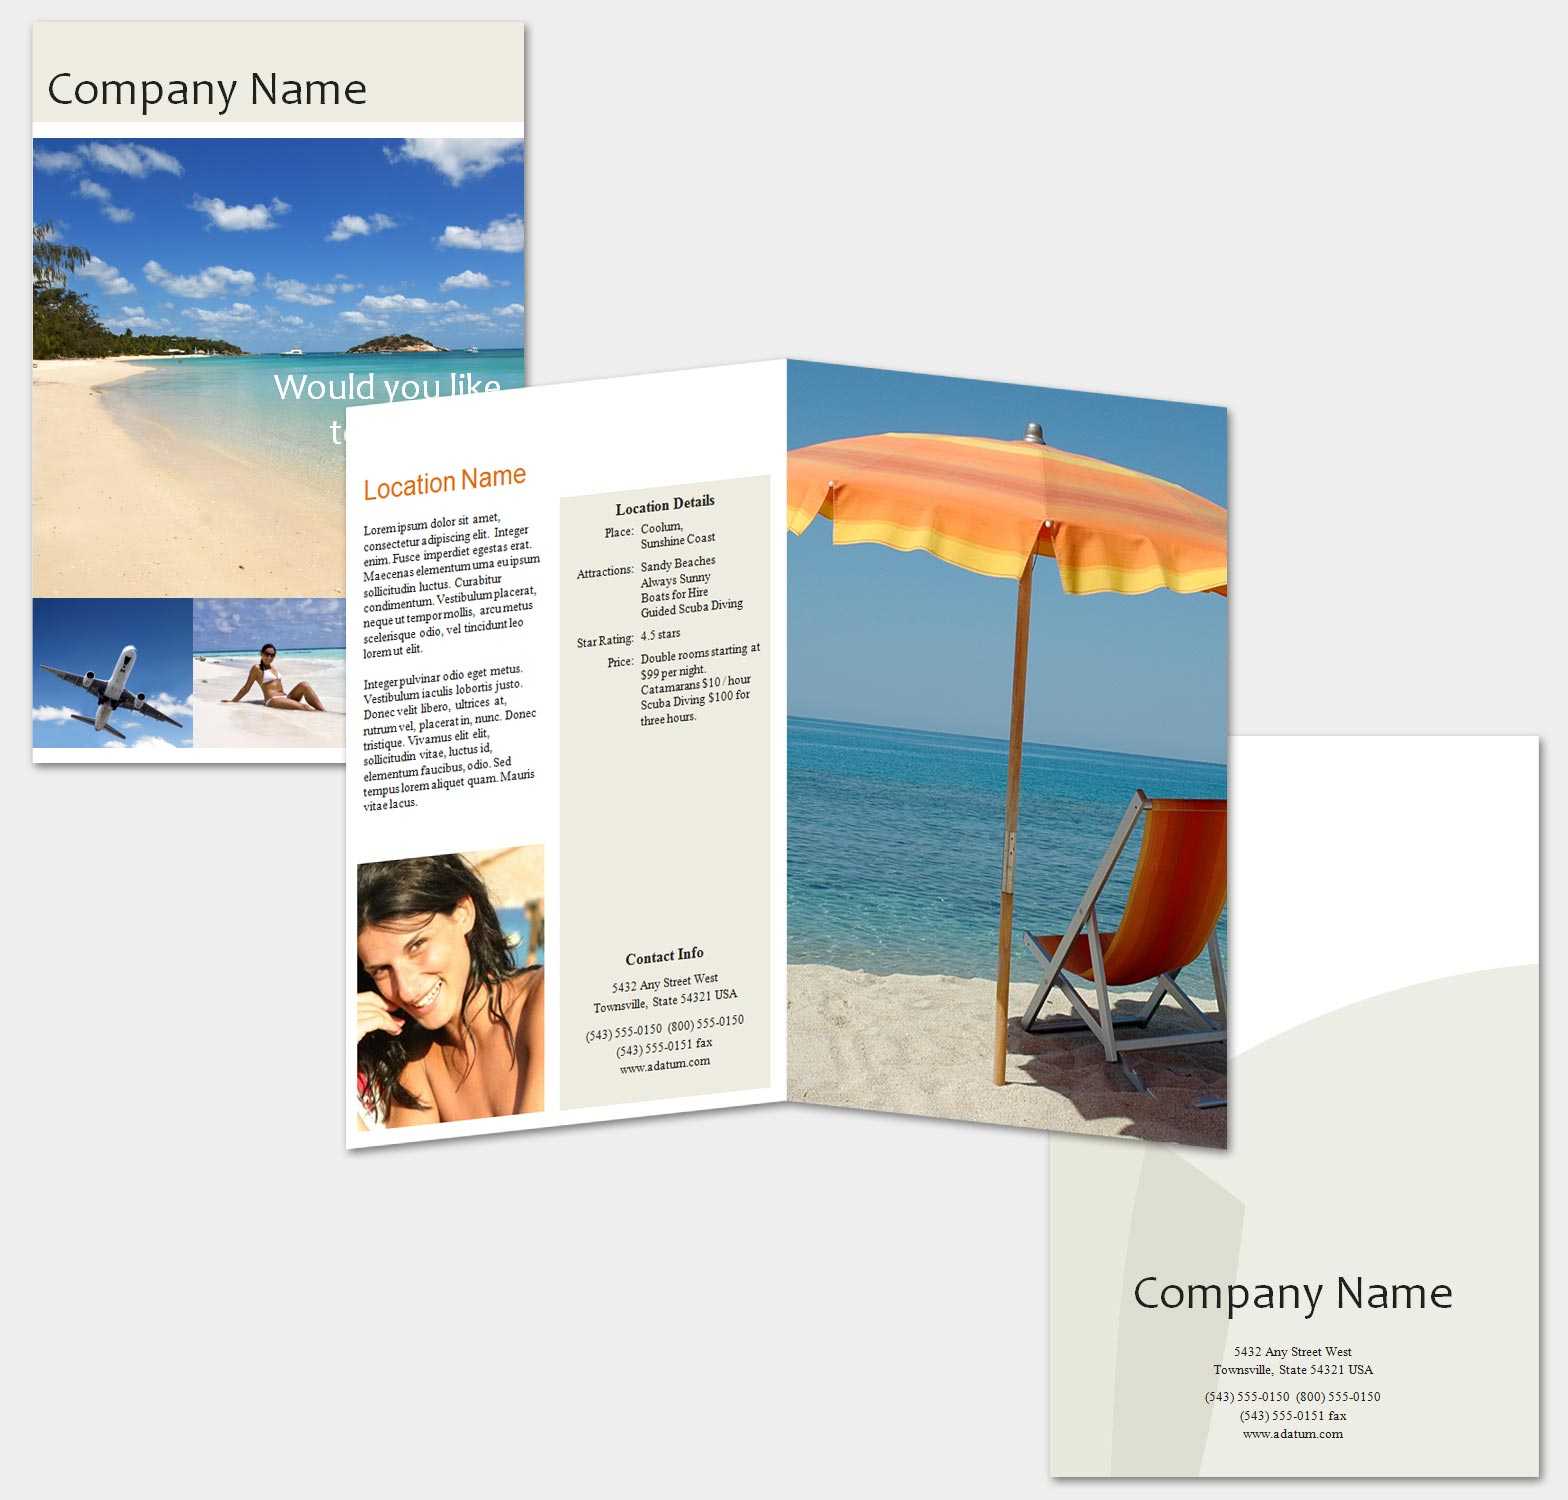 Cruise Travel Brochure Template Word Amp Publisher Brochure With Word Travel Brochure Template